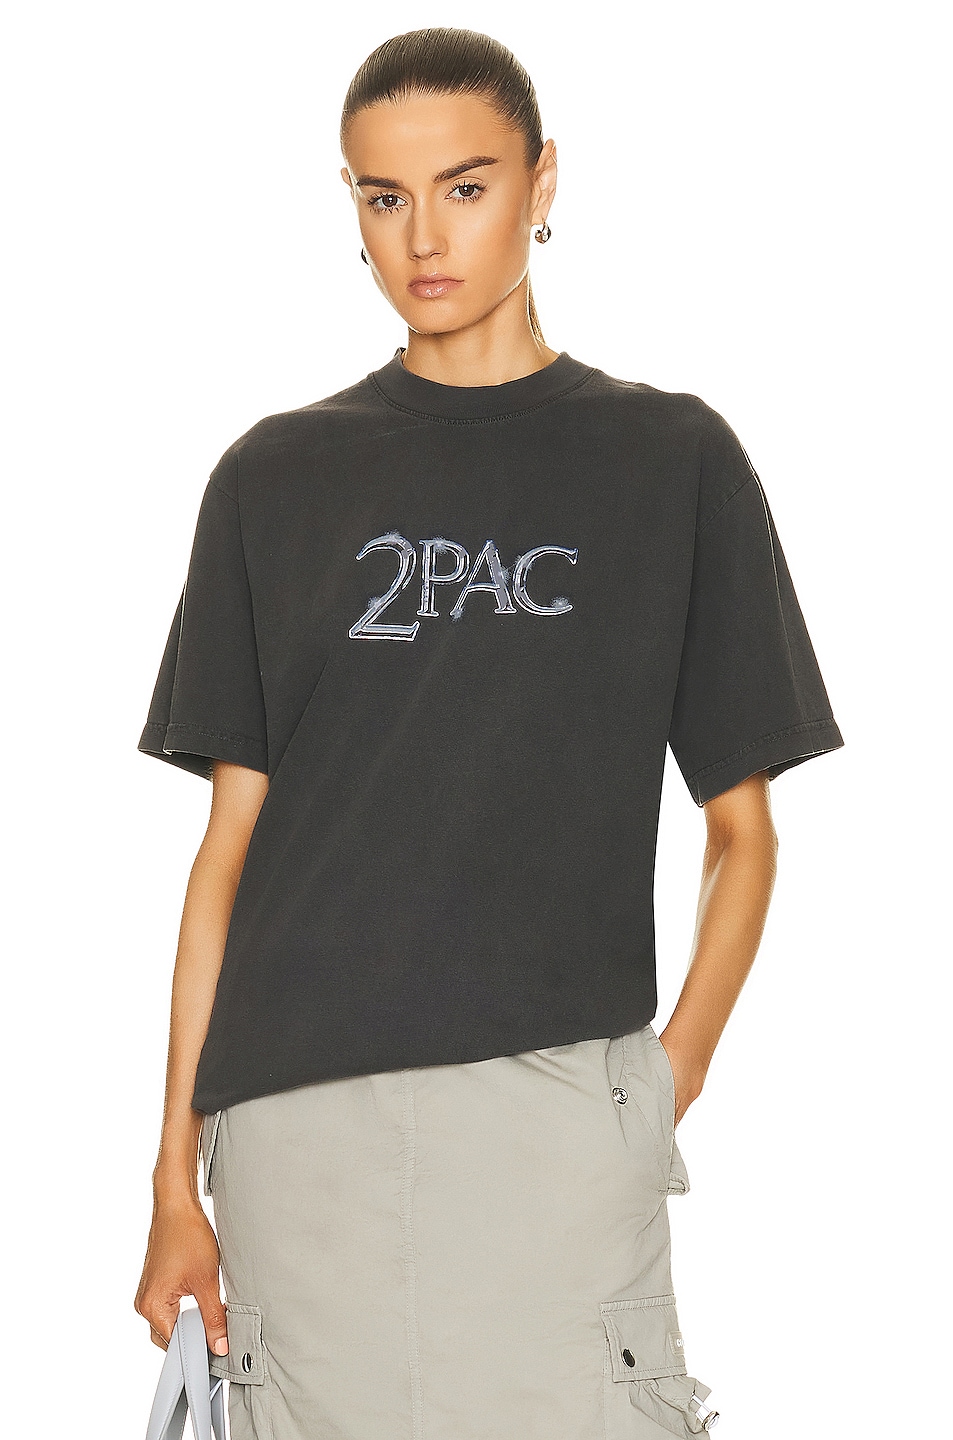 Image 1 of SIXTHREESEVEN 2pac All Eyez On Me T-shirt in Washed Black